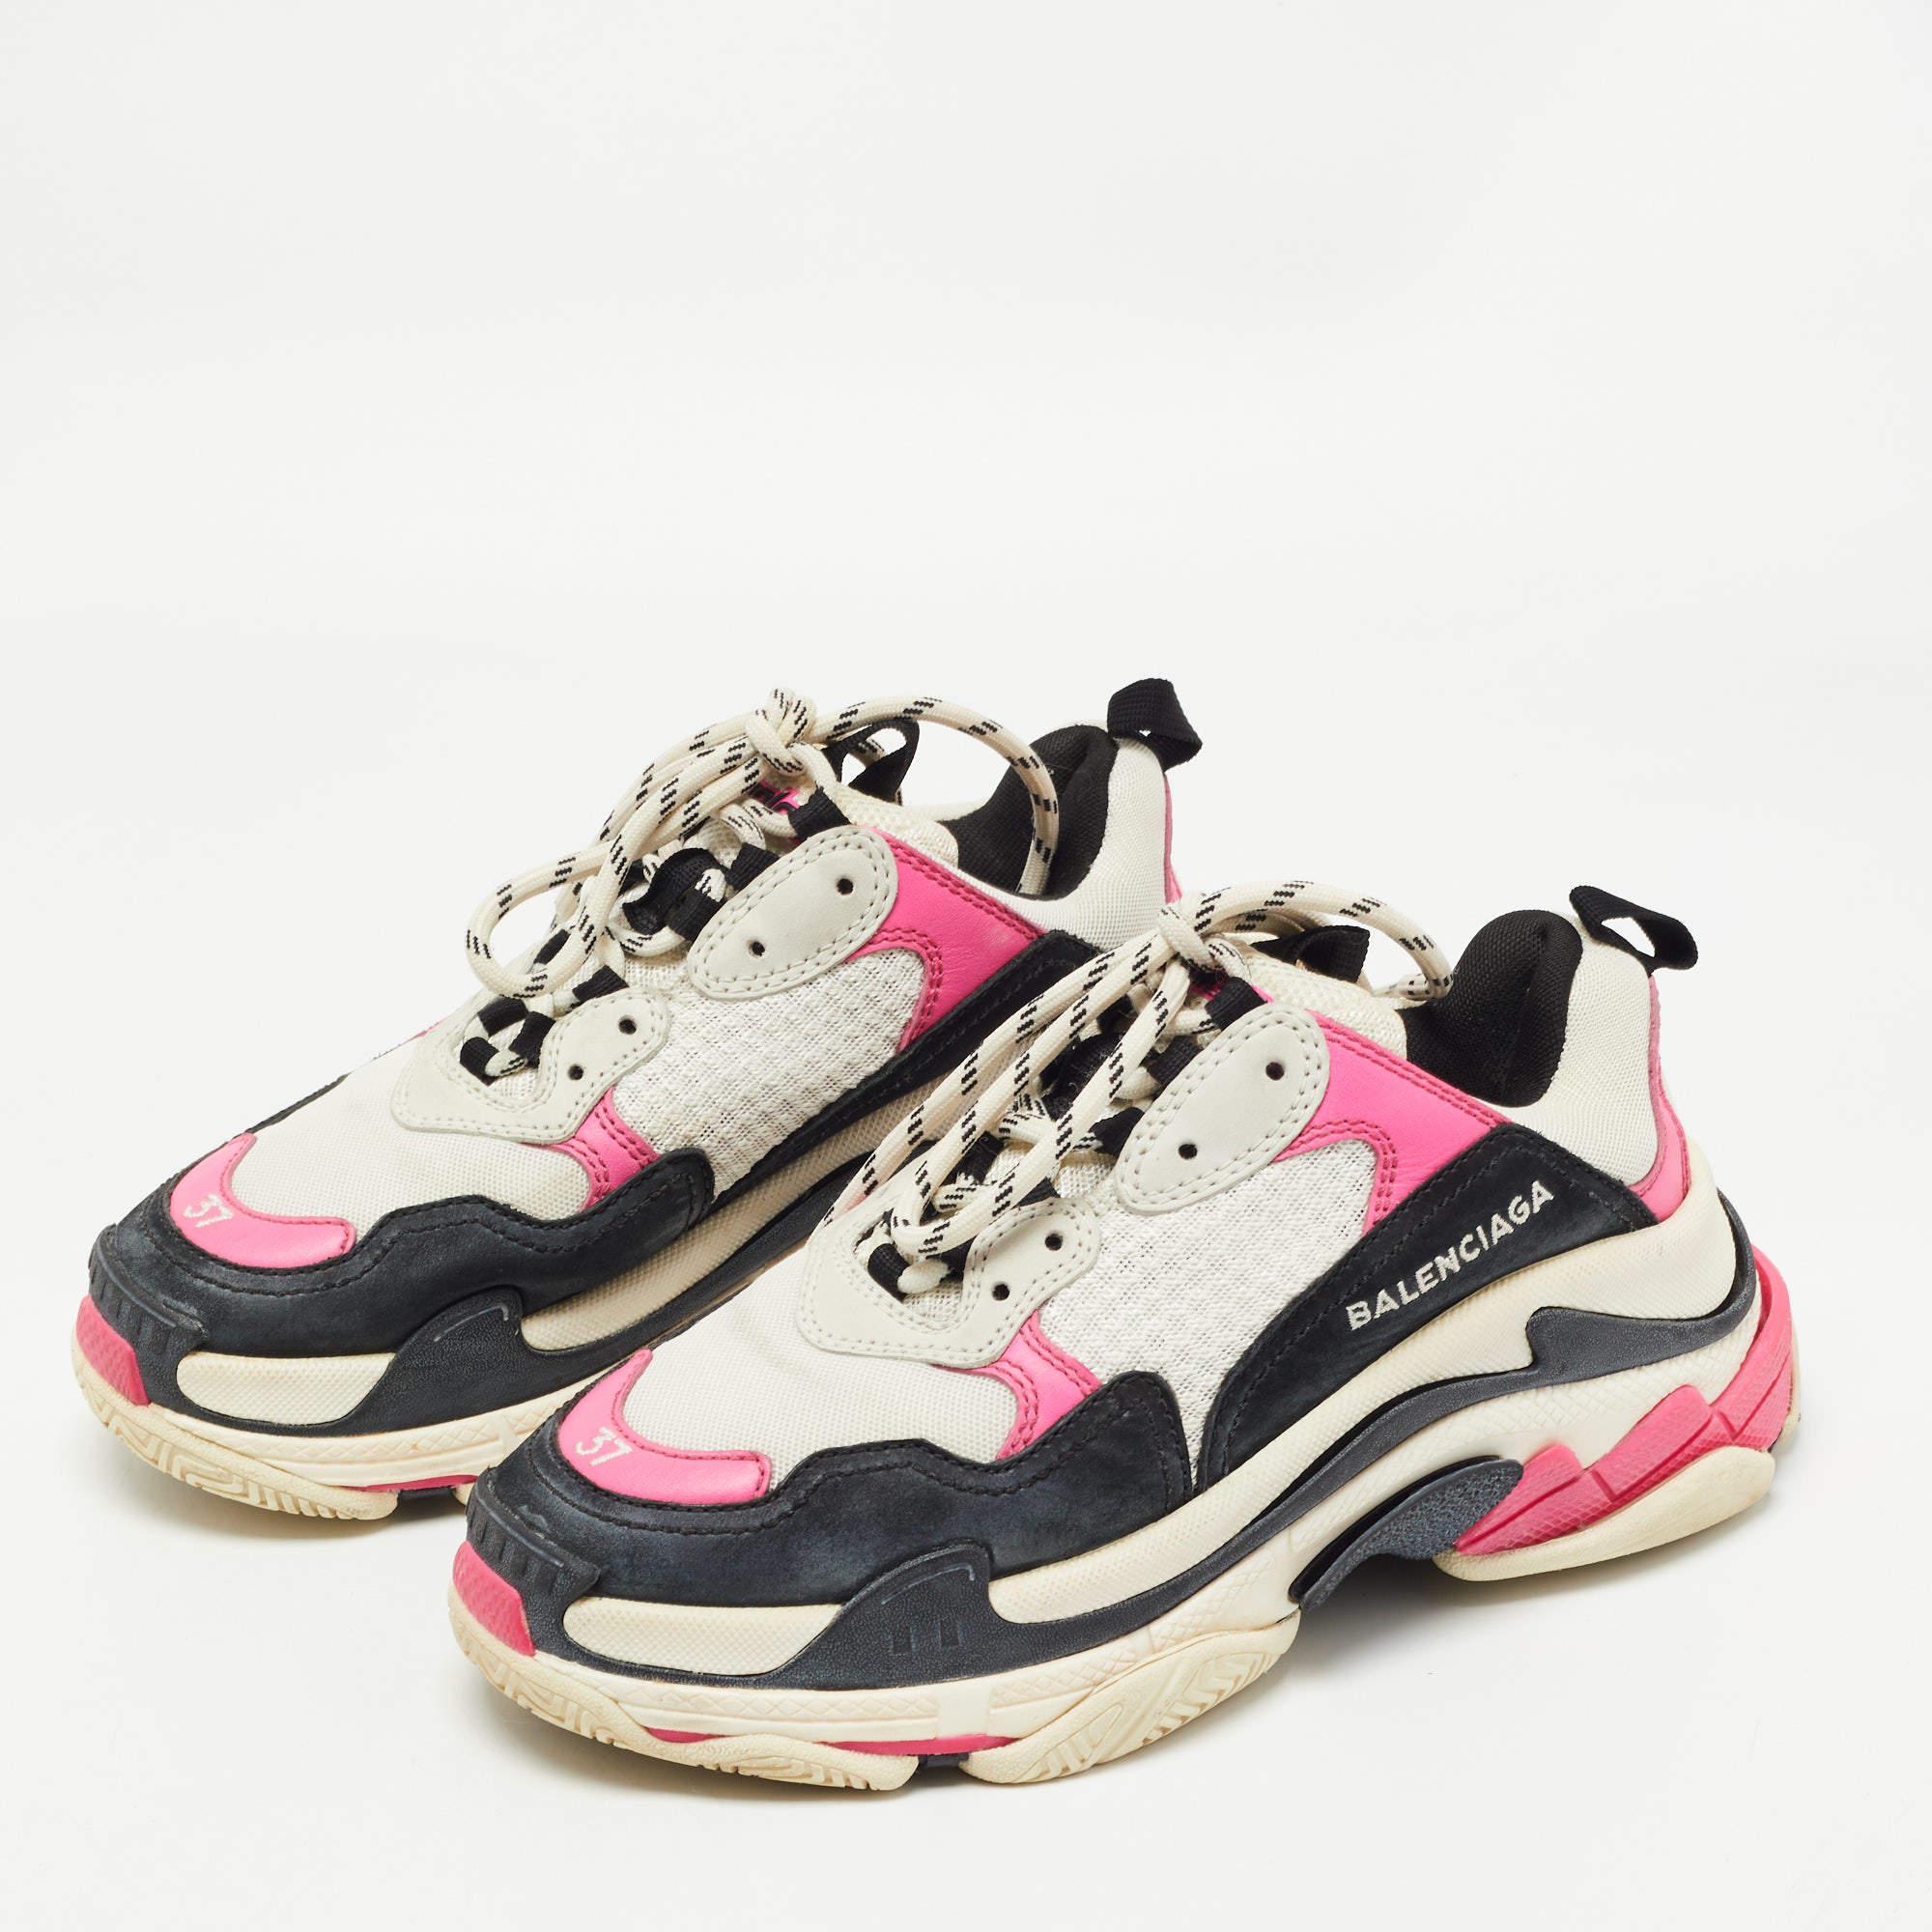 Coming in a classic silhouette, these Balenciaga Triple S sneakers are a seamless combination of luxury, comfort, and style. These sneakers are designed with signature details and comfortable insoles.

